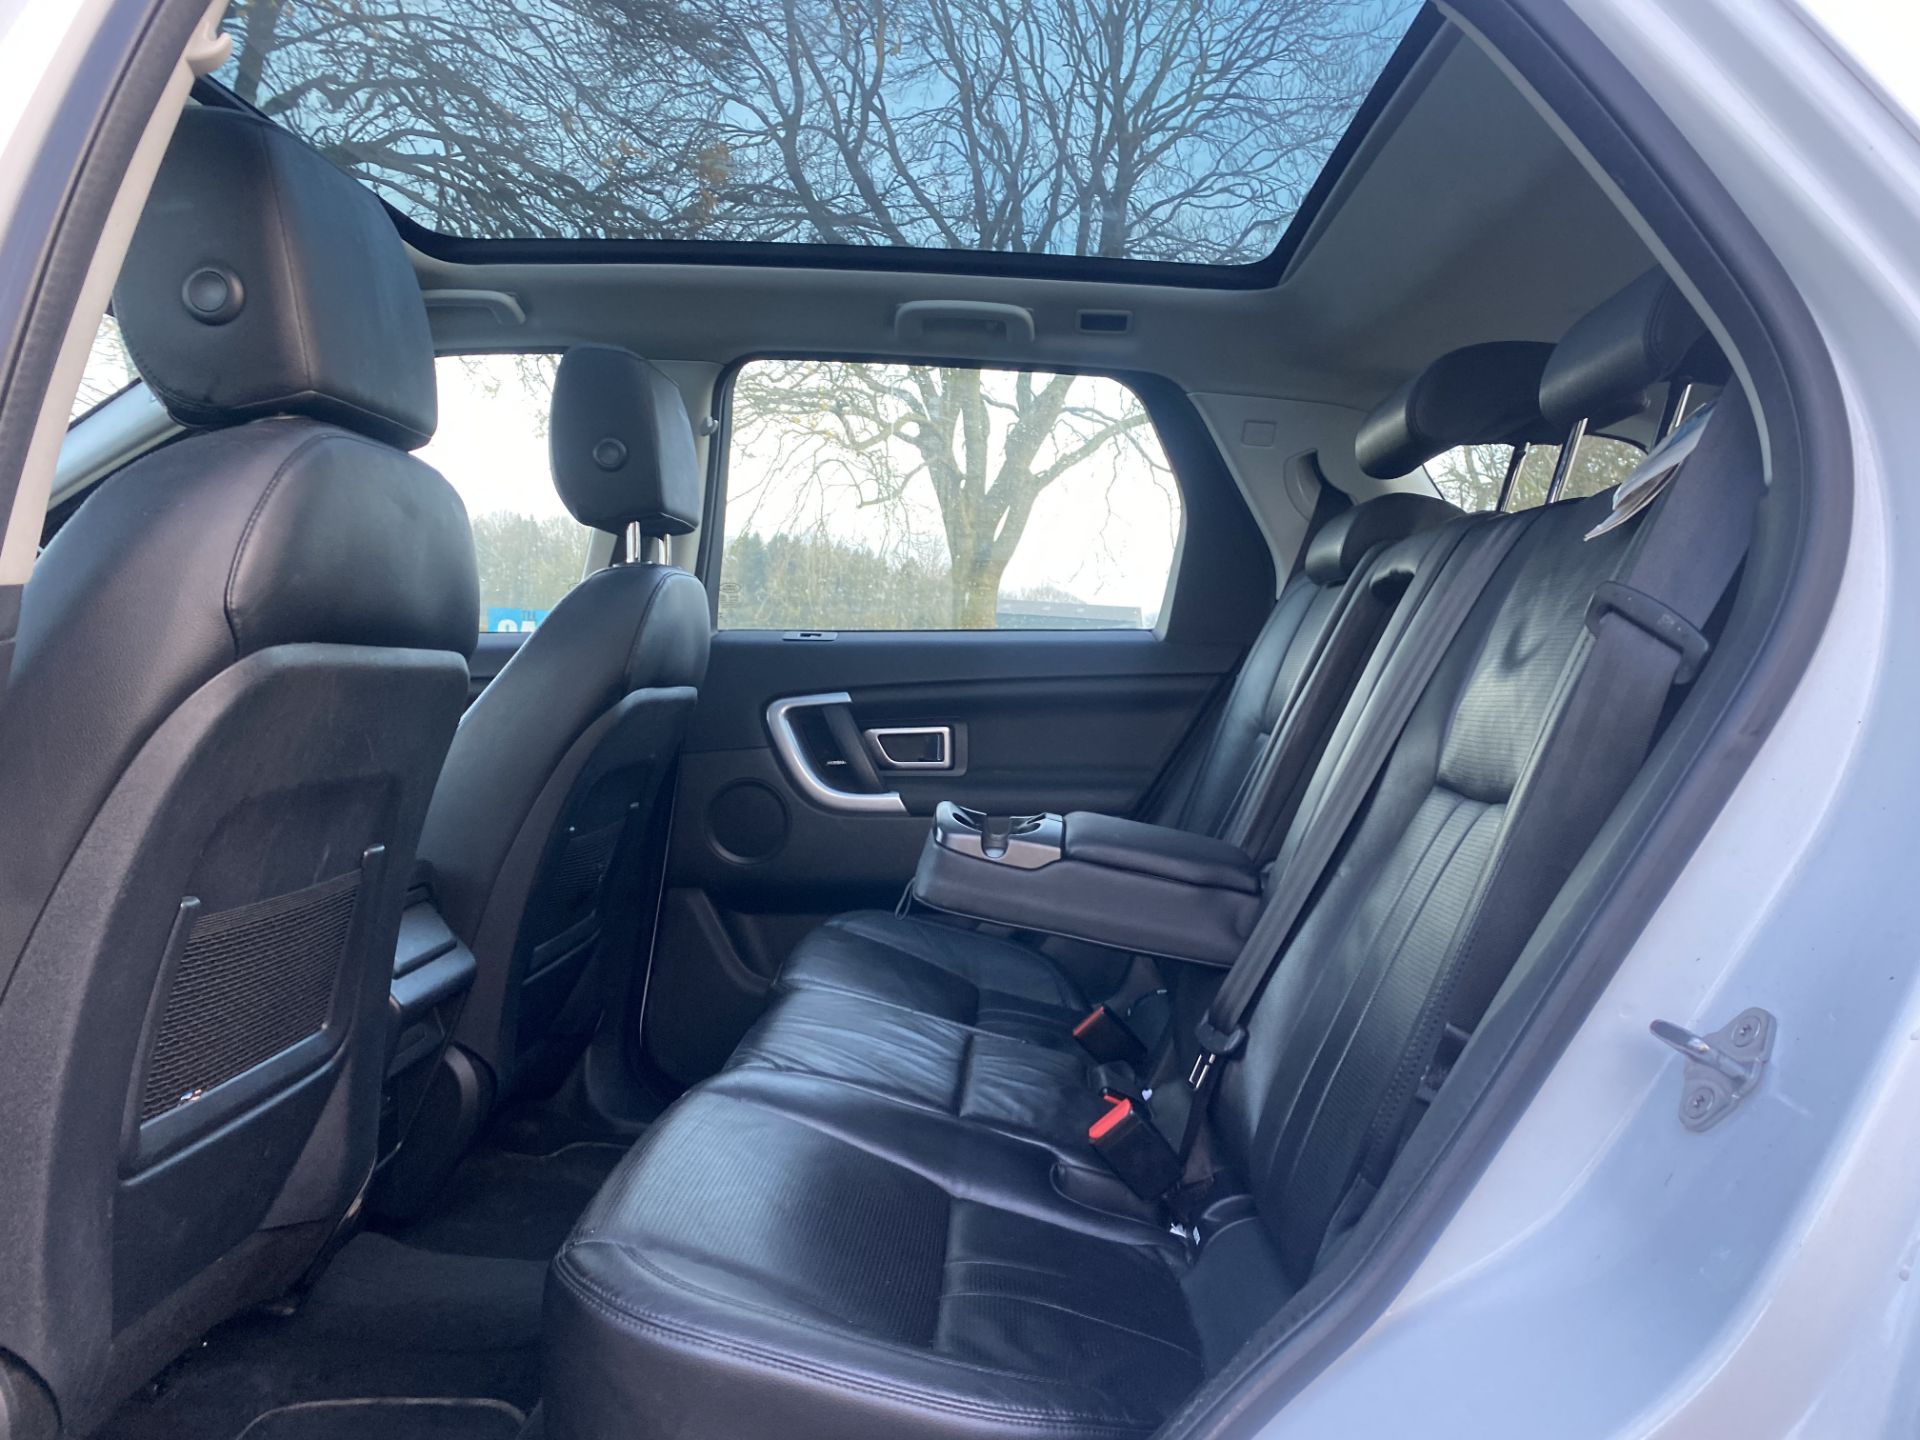 (ON SALE) LANDROVER DISCOVERY SPORT "HSE" 18 REG - 1 OWNER - LEATHER PANORAMIC ROOF - FULLY LOADED - - Image 12 of 37